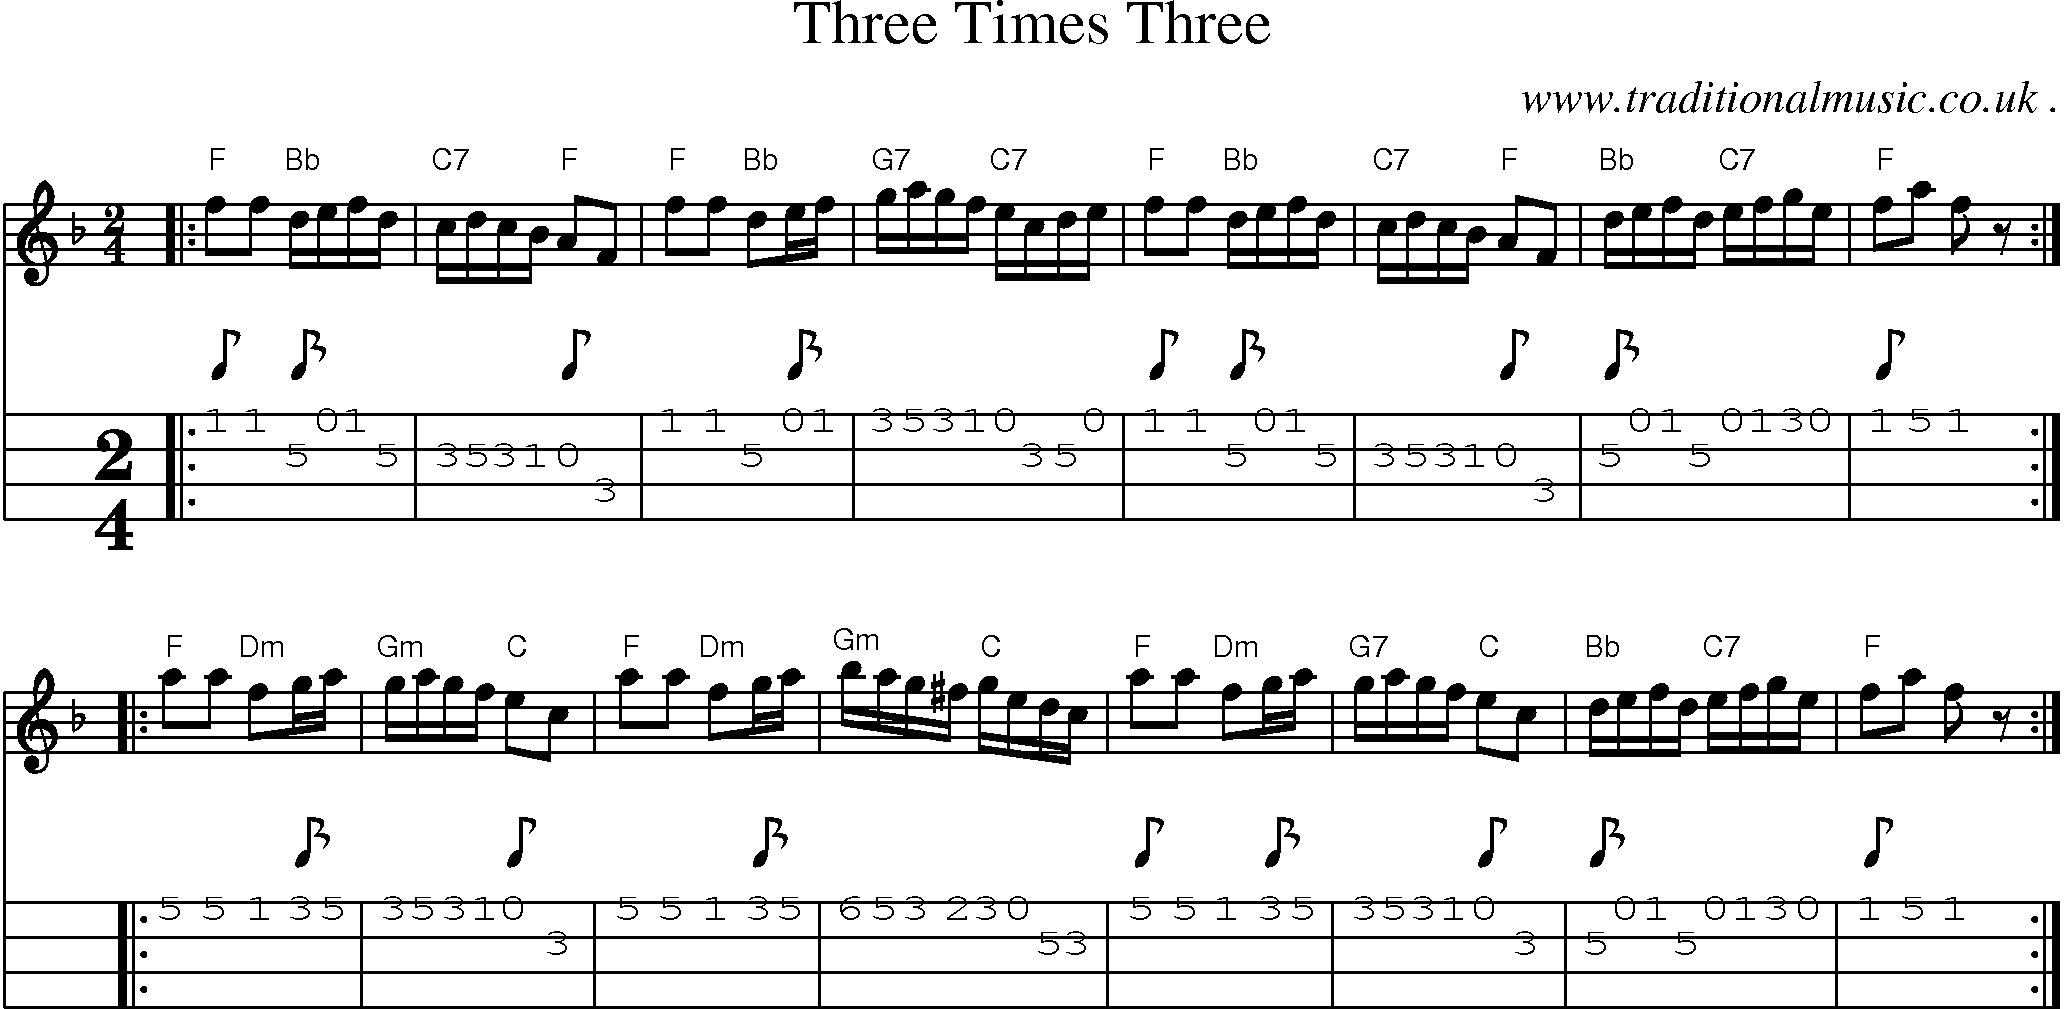 Sheet-music  score, Chords and Mandolin Tabs for Three Times Three